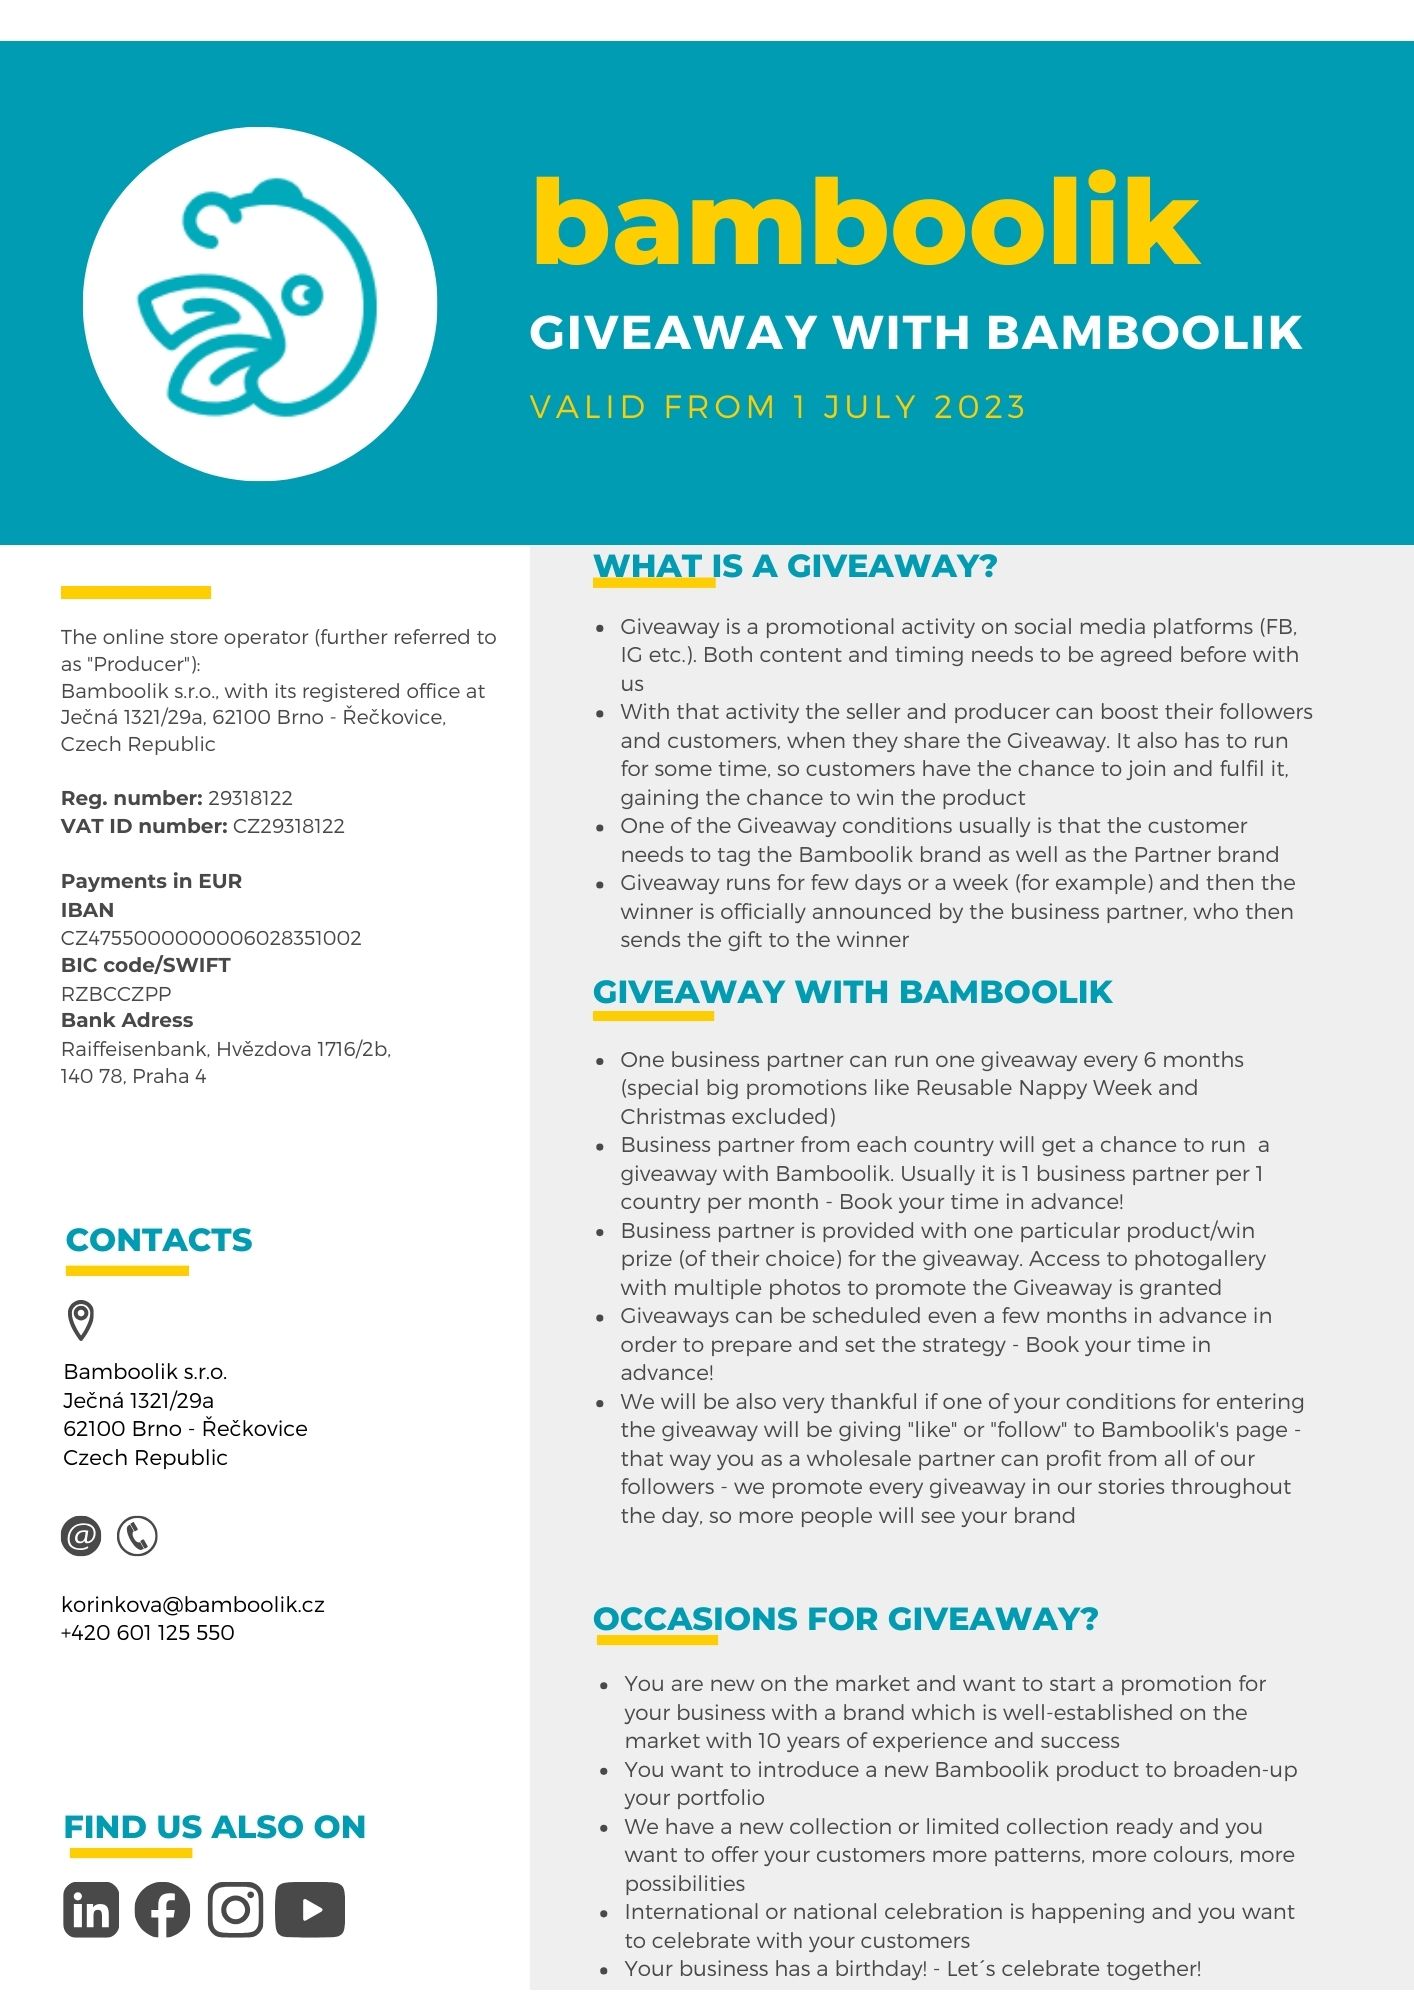 Giveaway with Bamboolik